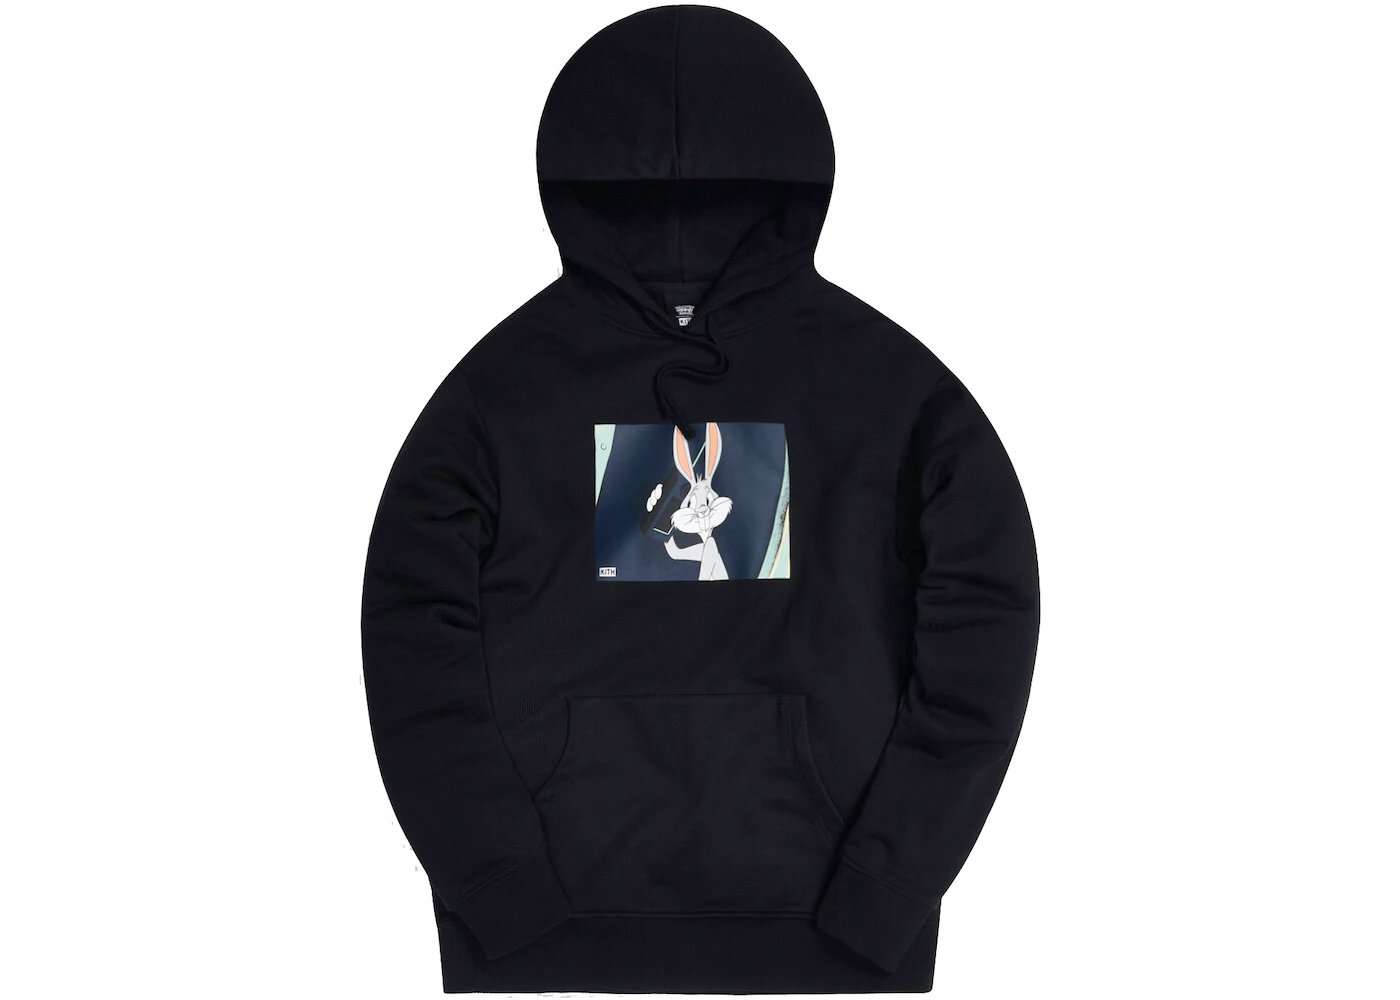 Kith x Looney Tunes What's Up Doc Hoodie Black Men's - SS20 - US